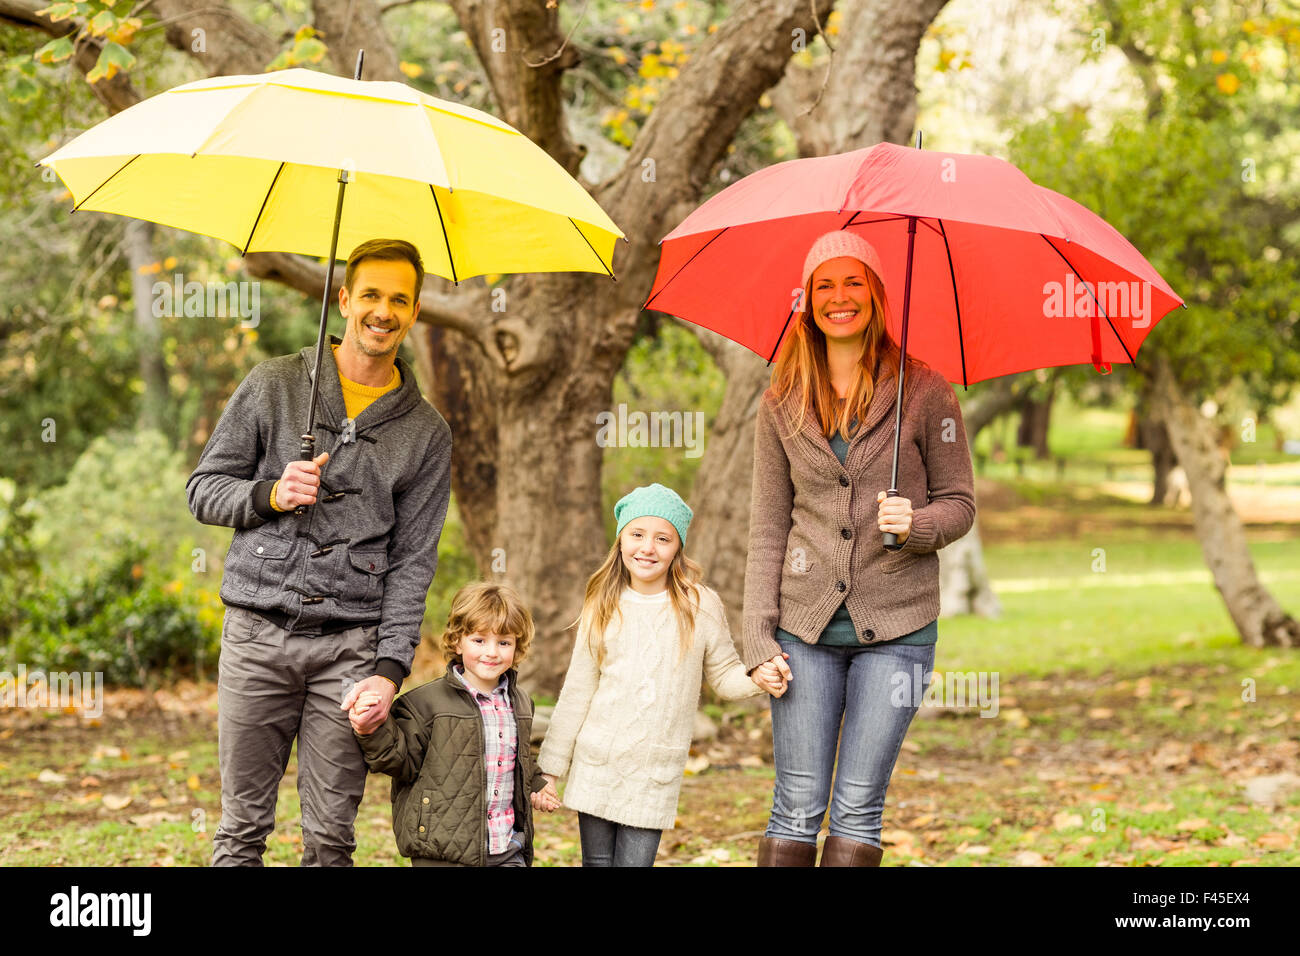 Smiling young family under umbrella Stock Photo